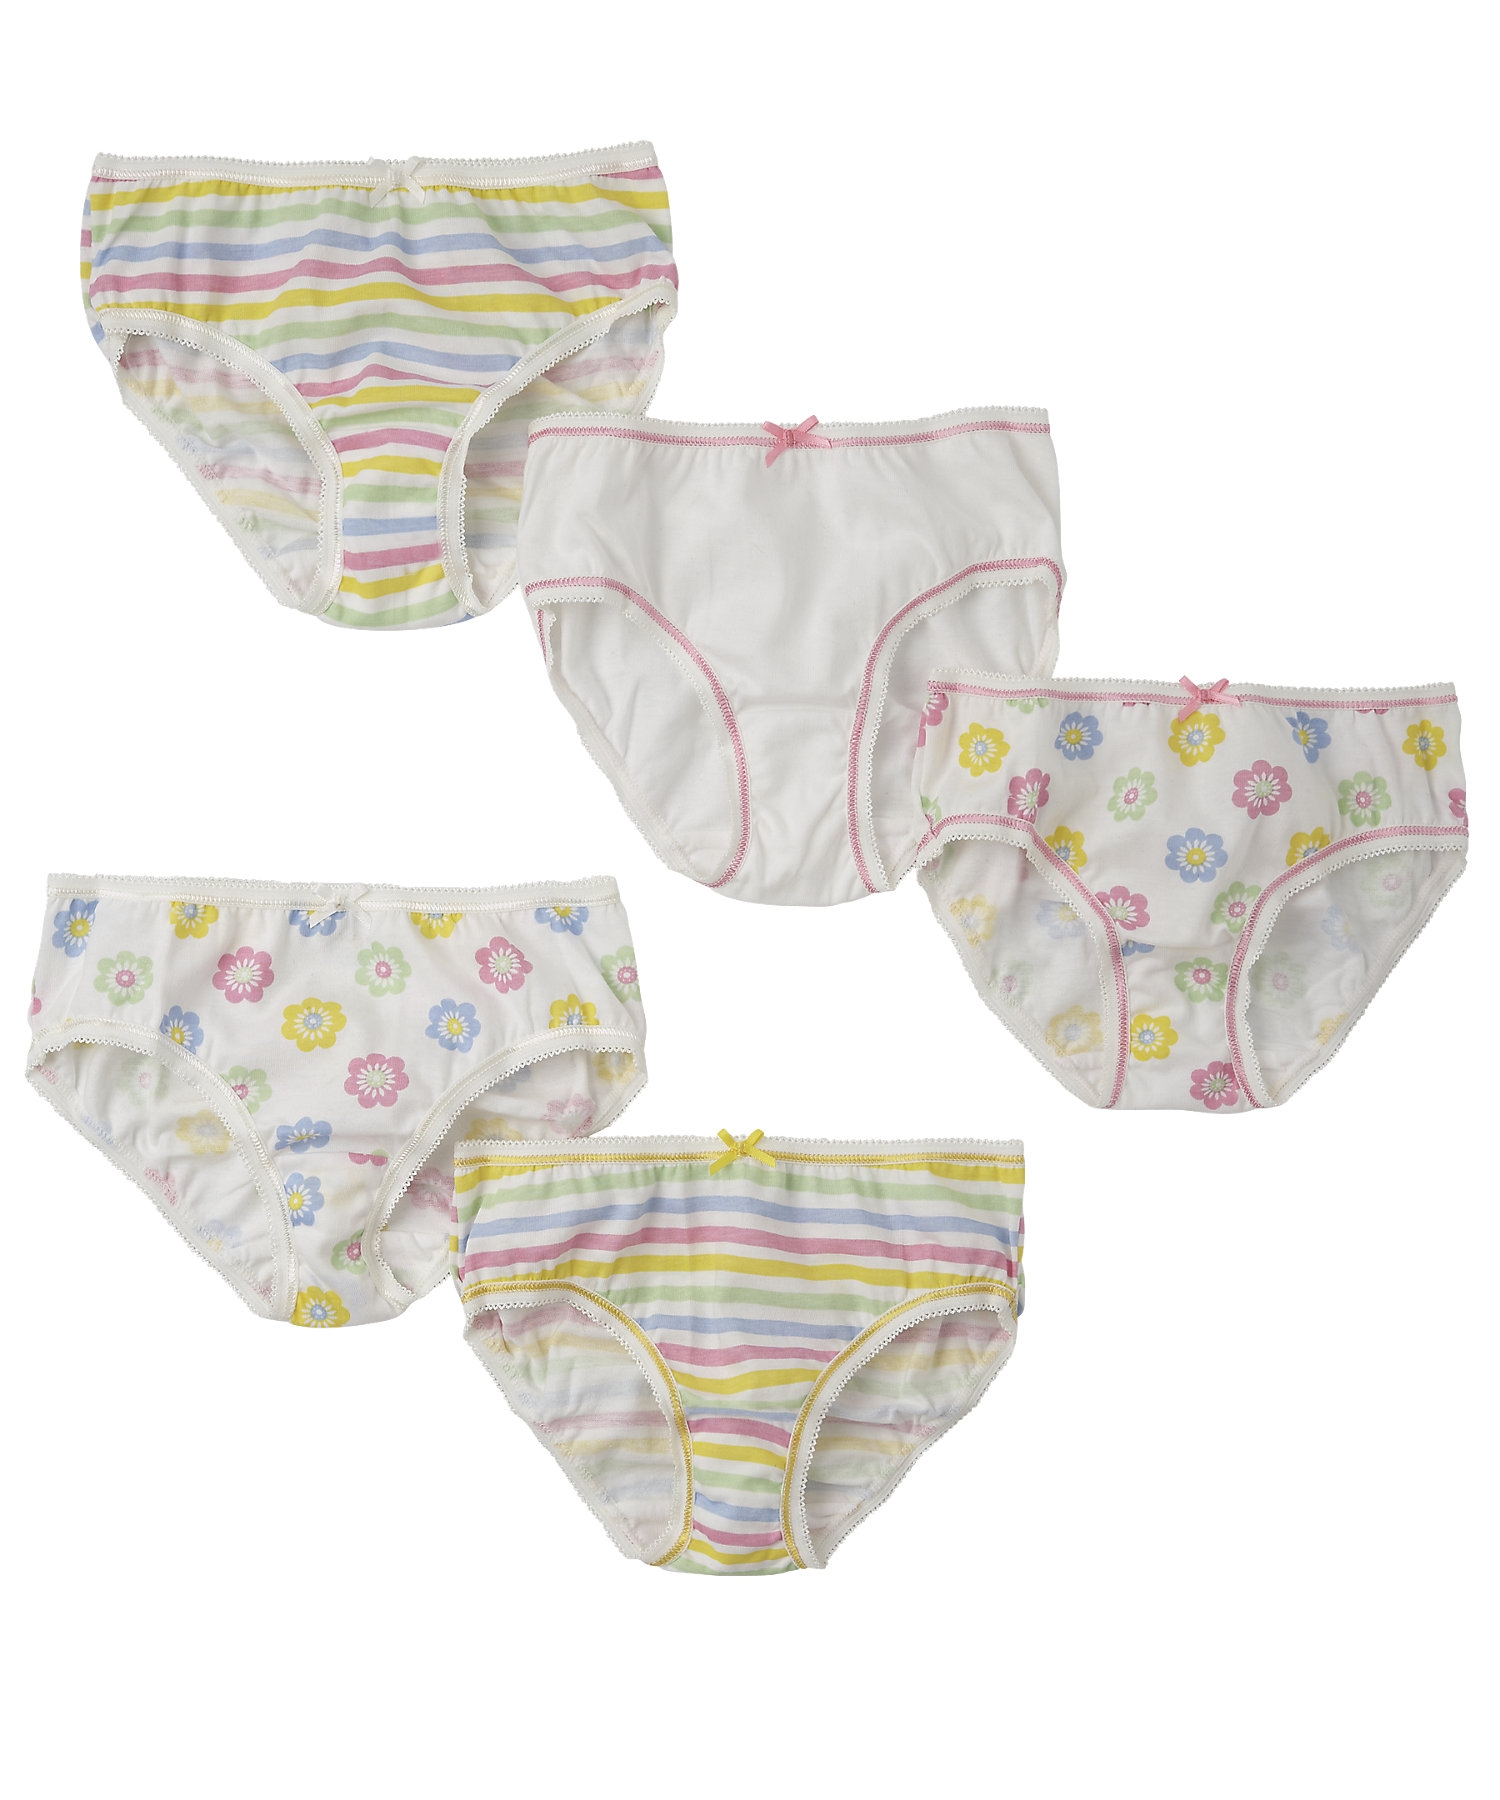 Mothercare | Girls Briefs Printed And Striped - Pack Of 5 - White